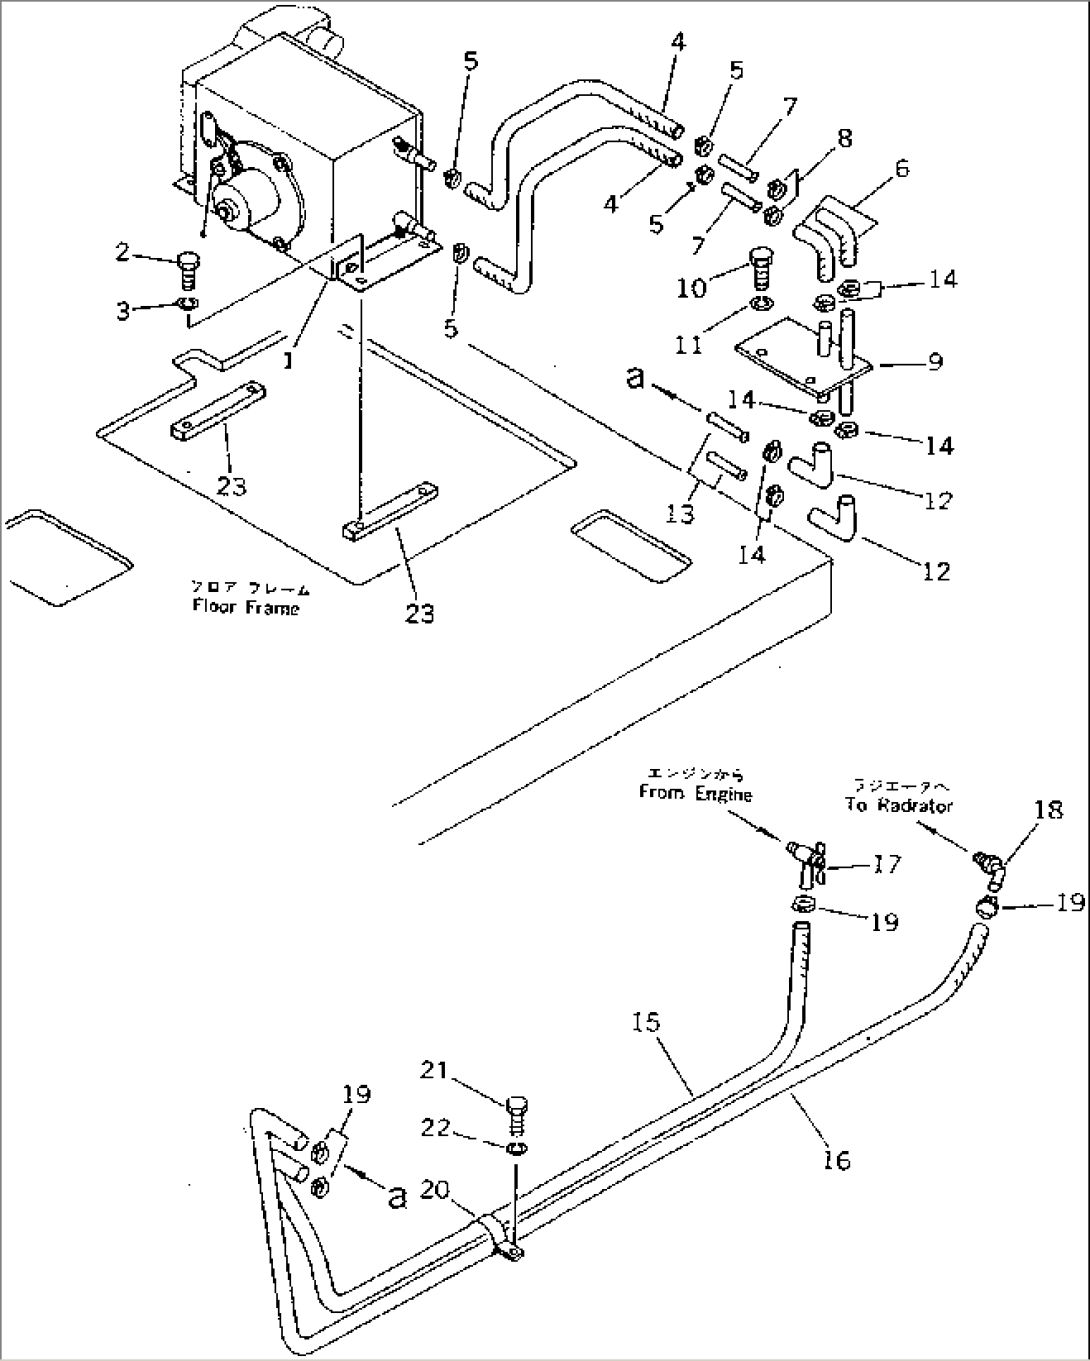 CAR HEATER (1/4) (HEATER UNIT AND PIPING)